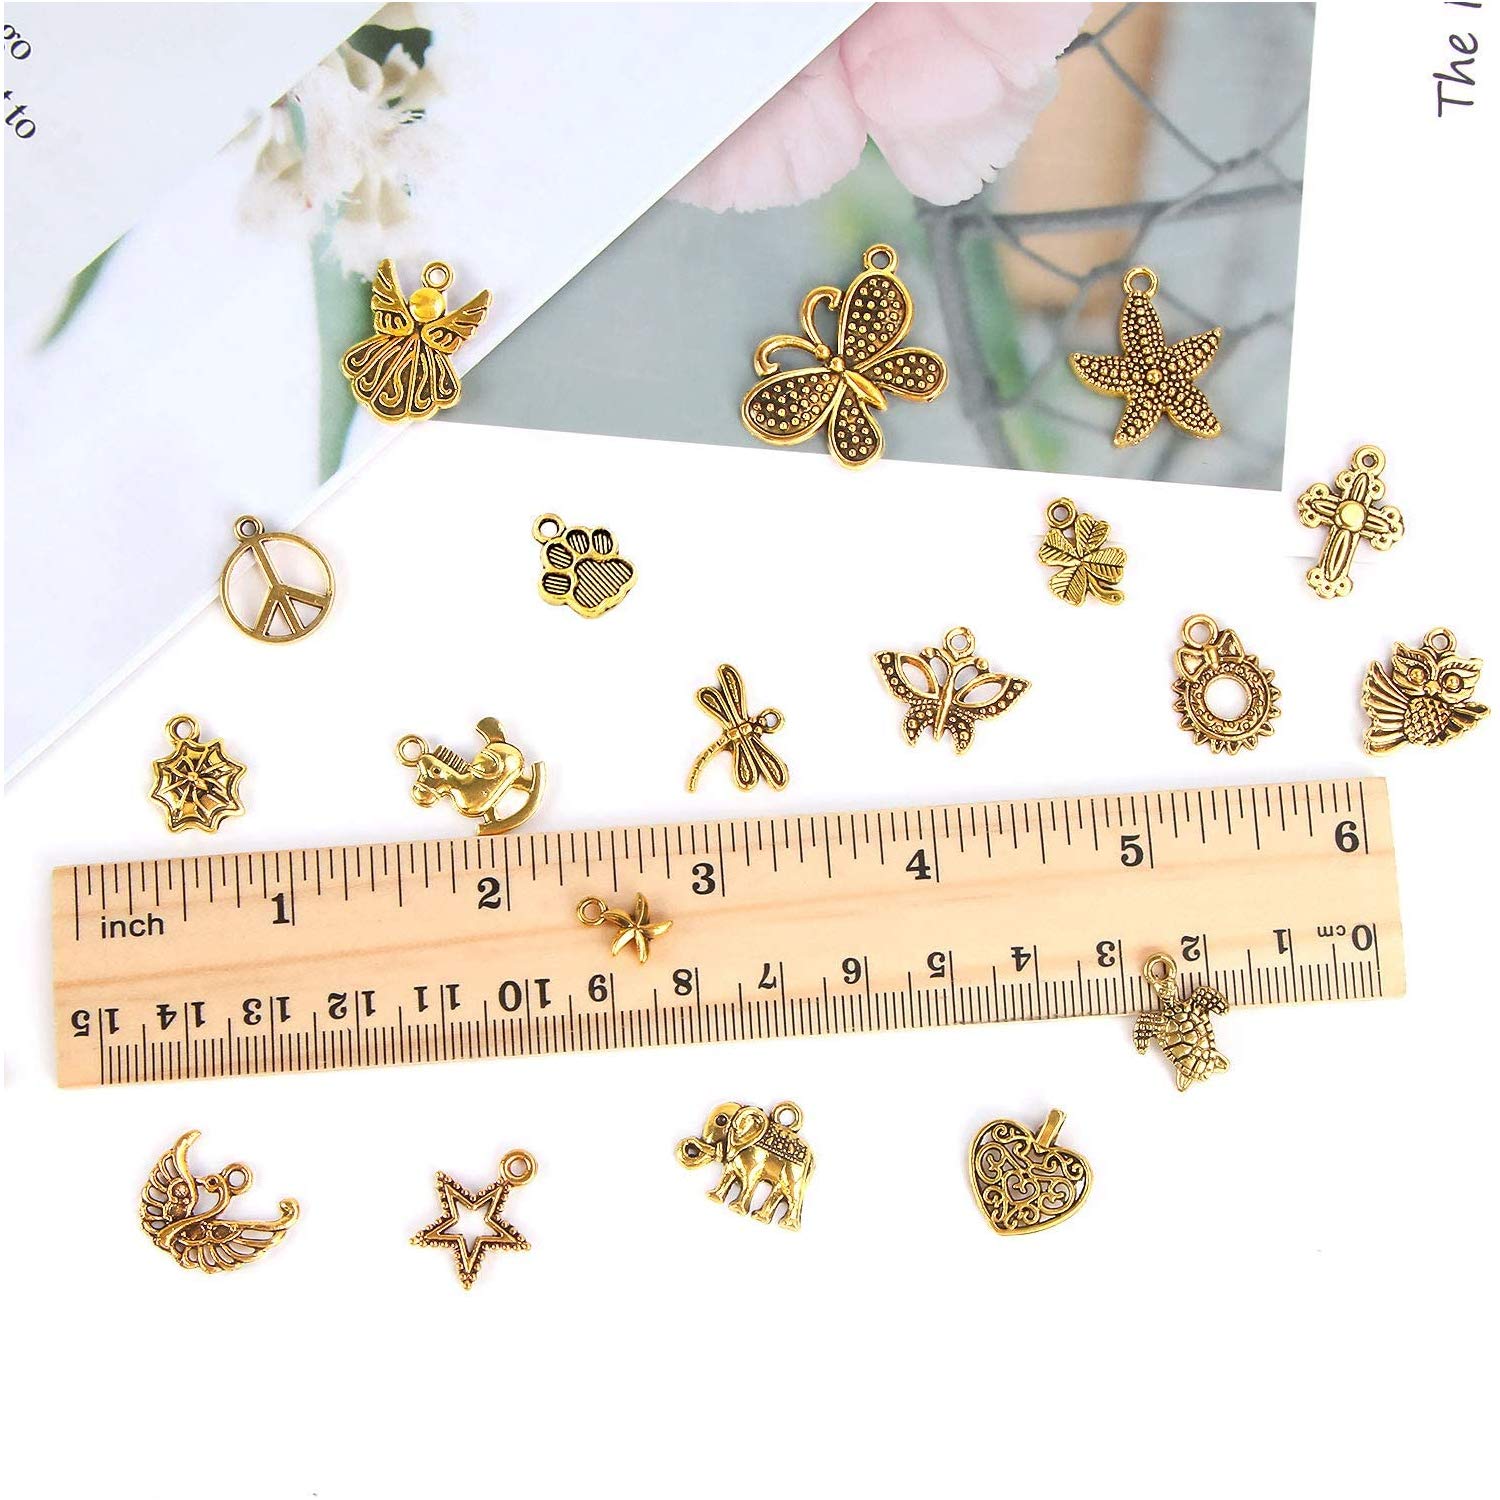 SANNIX 200Pcs Gold Charms Bulk Antique Gold Charms for Jewelry Making Charm Bracelet Necklace Earrings DIY Craft Making